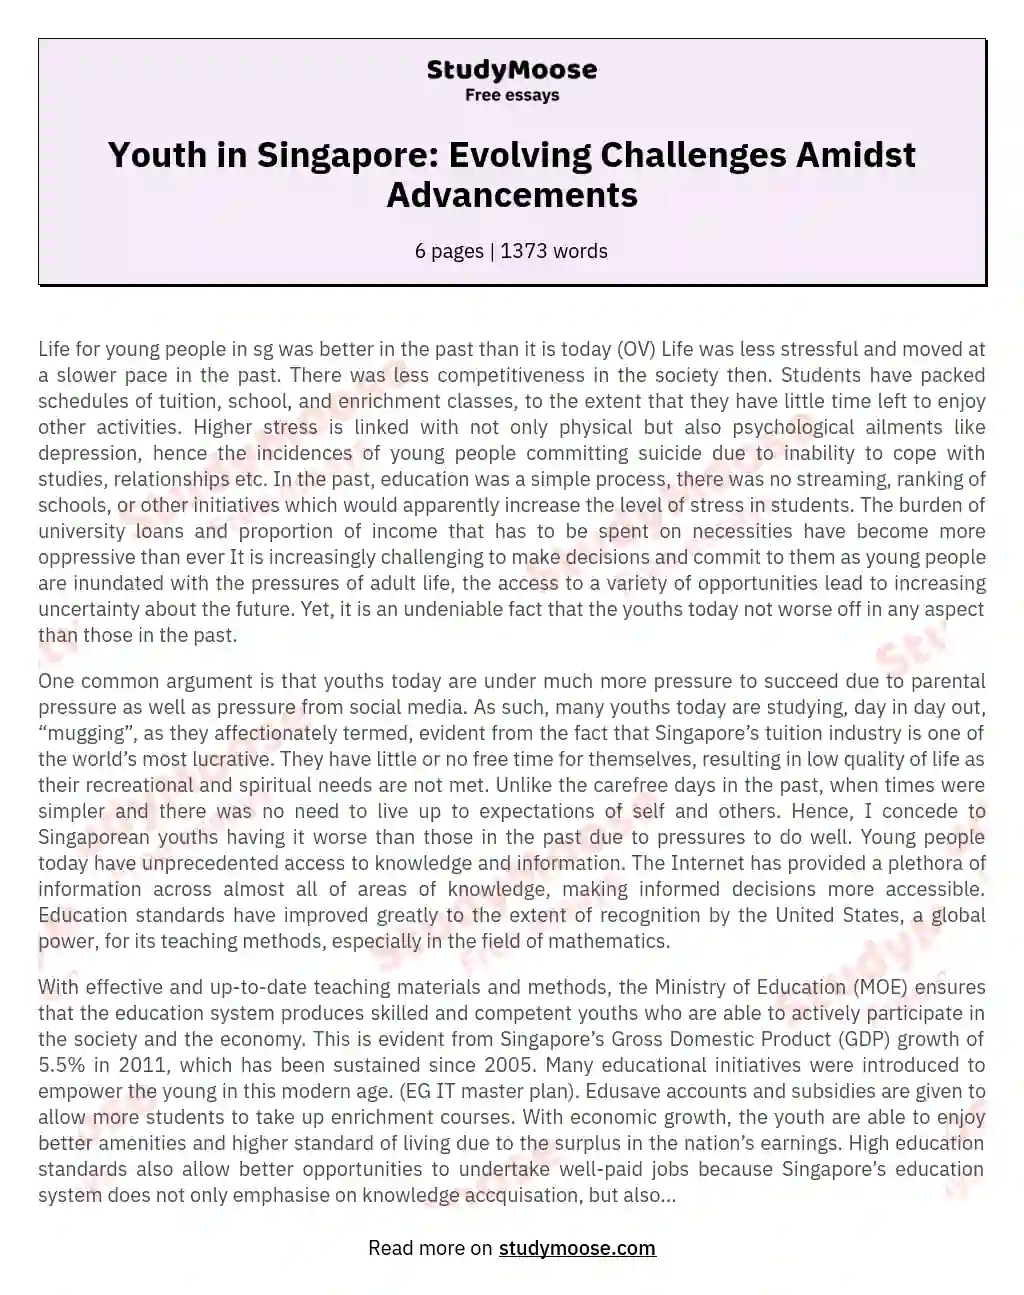 Youth in Singapore: Evolving Challenges Amidst Advancements essay